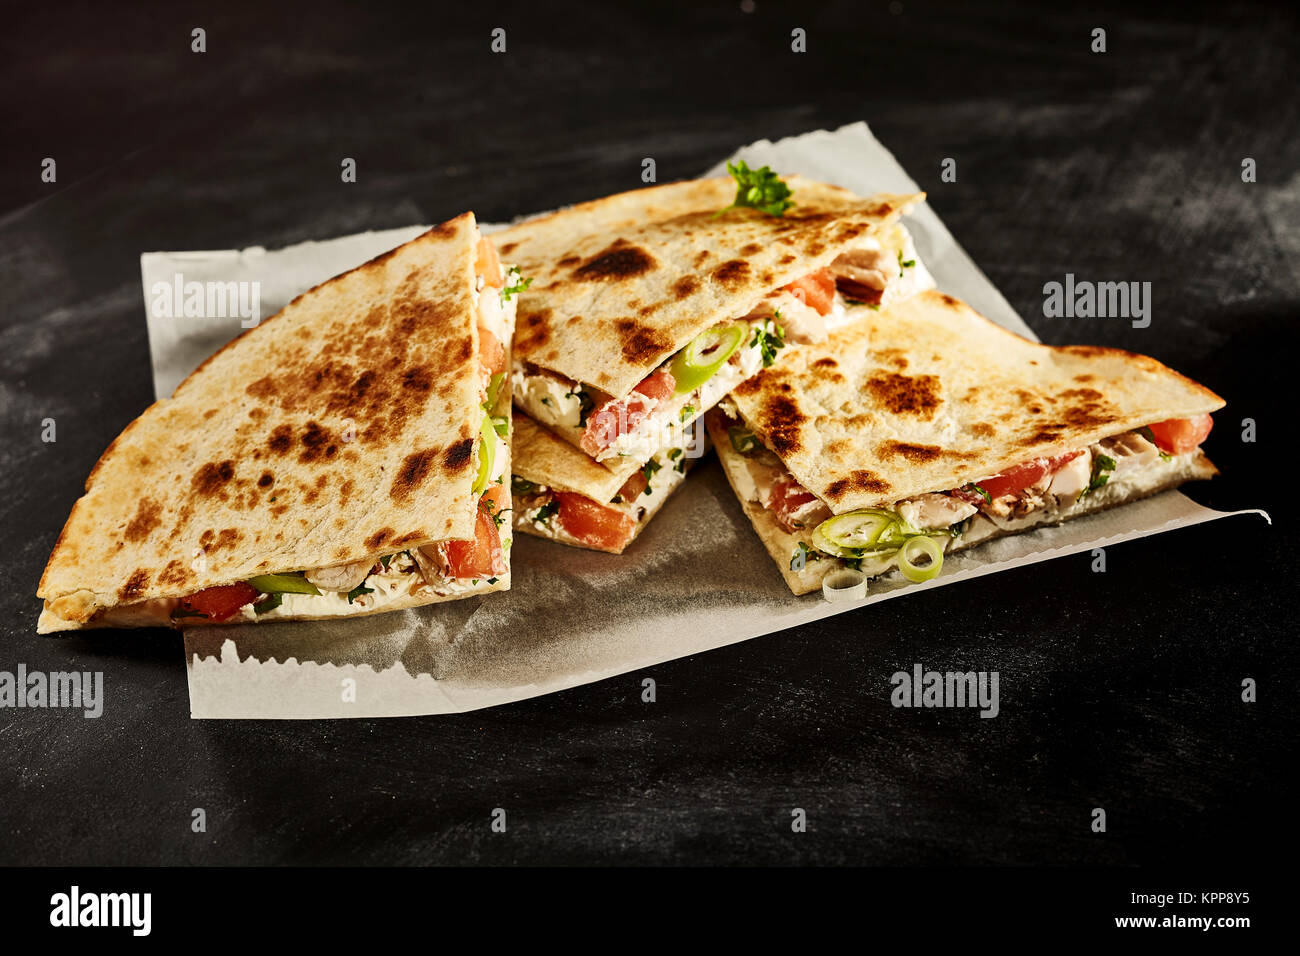 Set of four nutrious cooked chicken wheat tortilla quesadillas stuffed with onion, tomato and herbs in wax paper on dark table Stock Photo